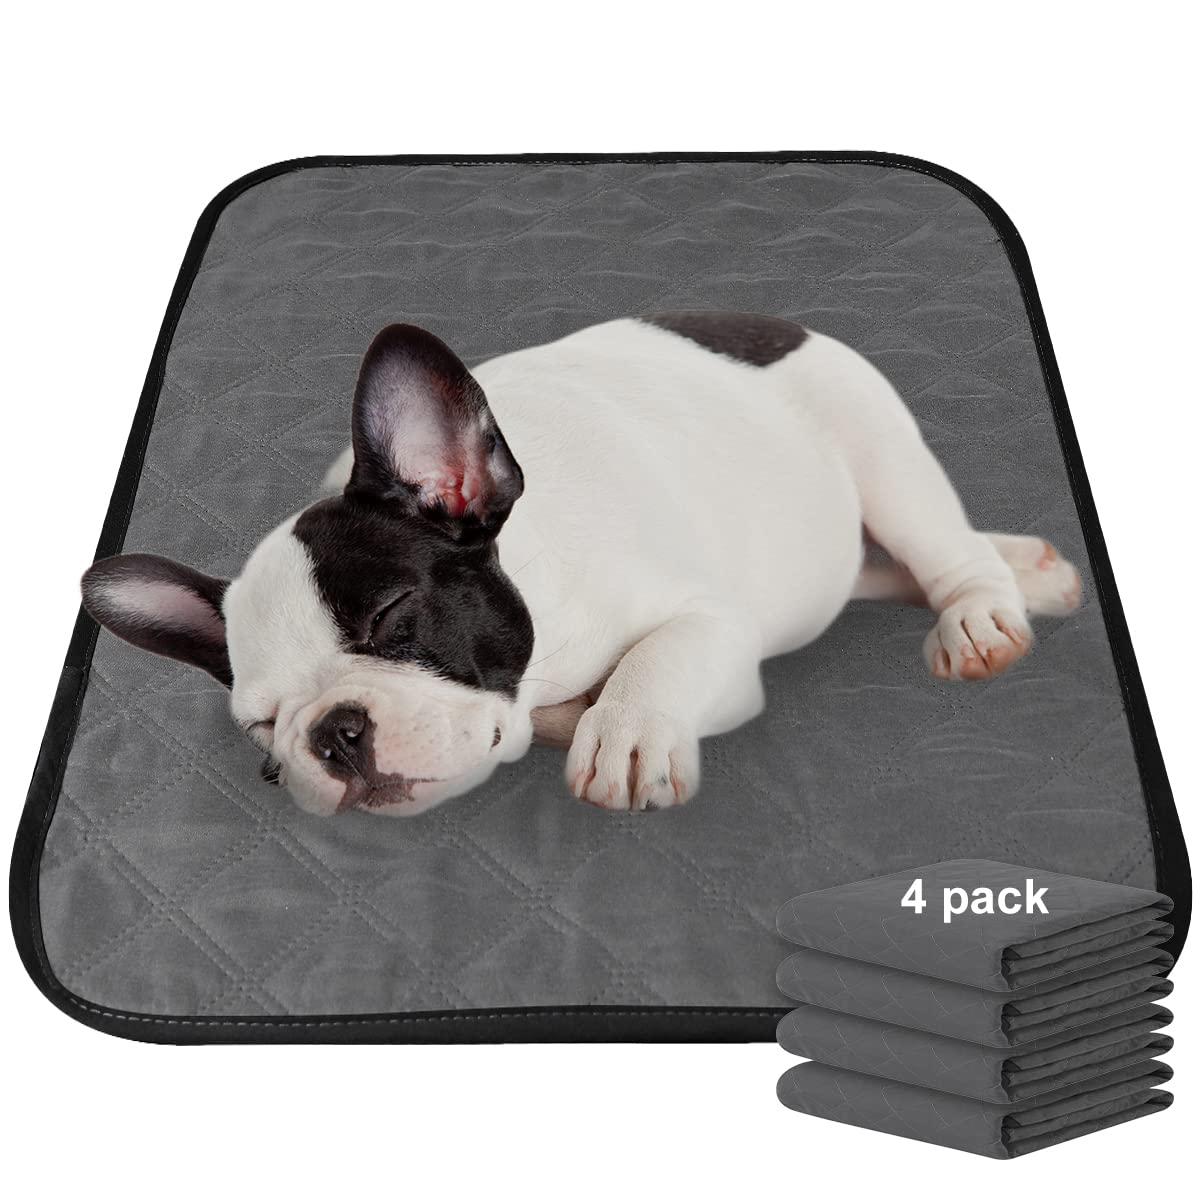 CBBPET 4PCS Washable Puppy Pads 18 x 24, Upgrade Non-Slip Dog Pee Pads with High Soaks, Reusable,Waterproof for Training,Whelping,Housebreaking, Incontinence,for Fence